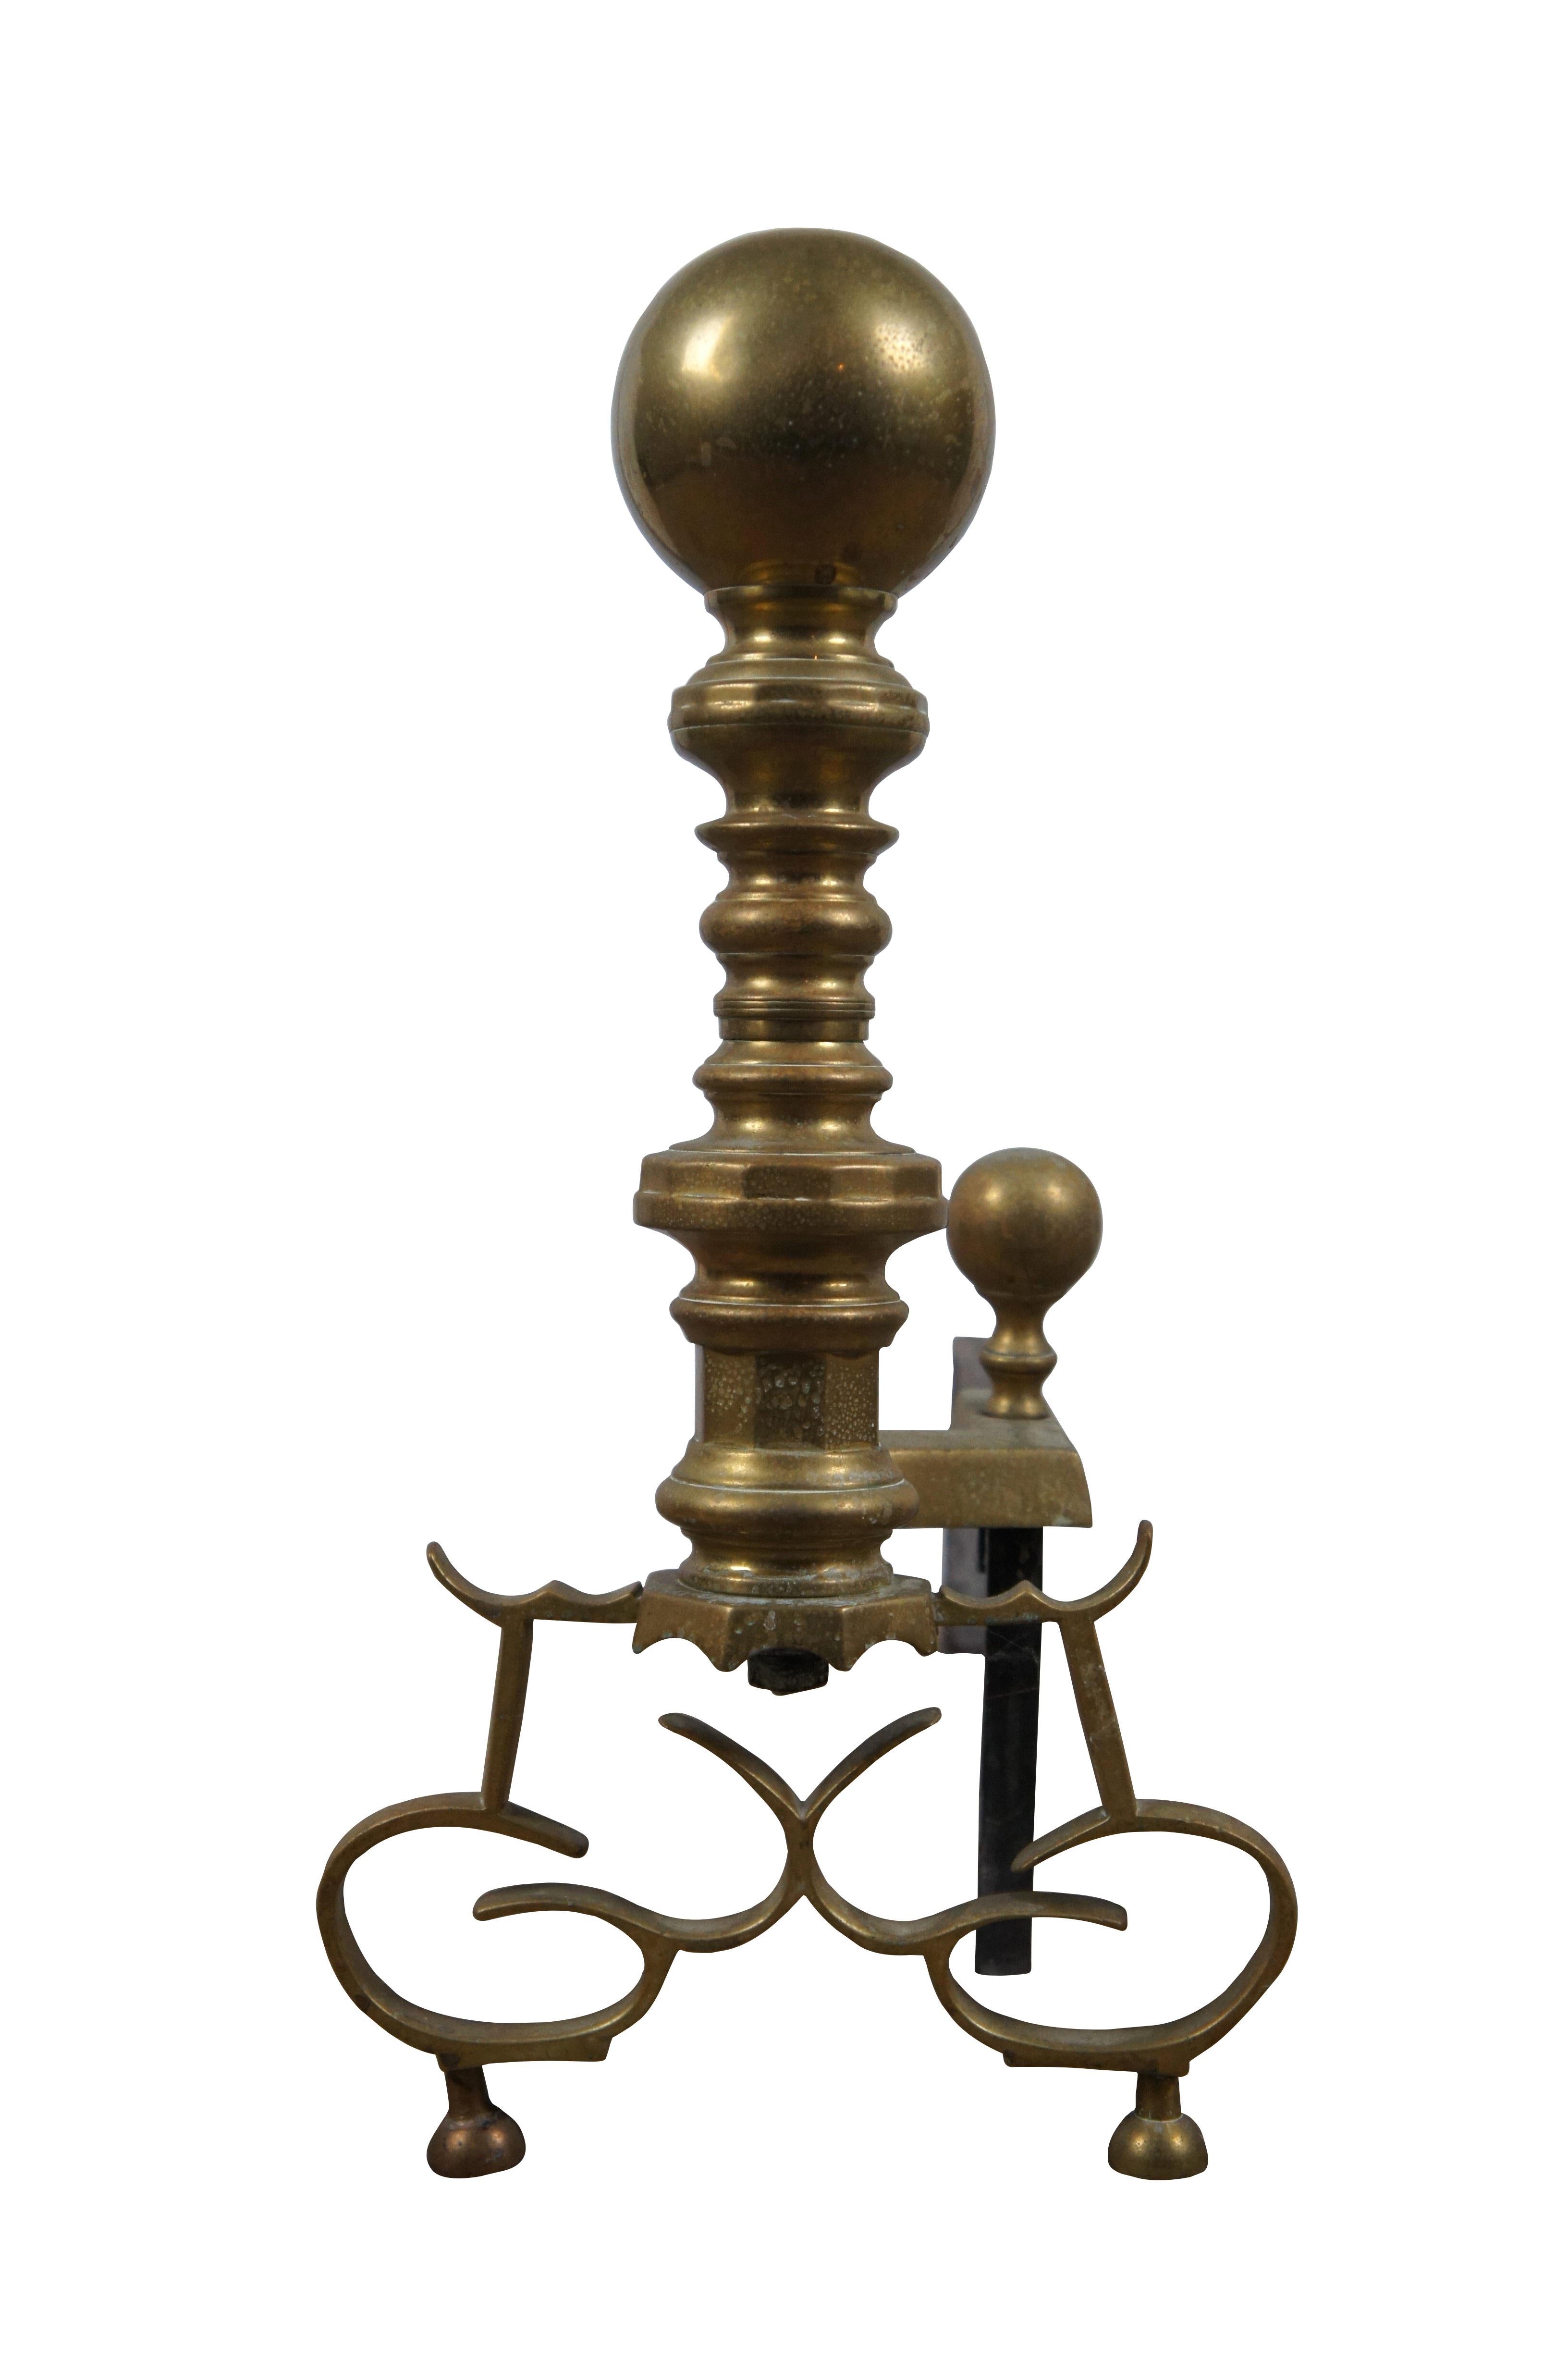 Antique Georgian Colonial Revival Brass Cannonball Andirons Fireplace Fire Dogs In Good Condition For Sale In Dayton, OH